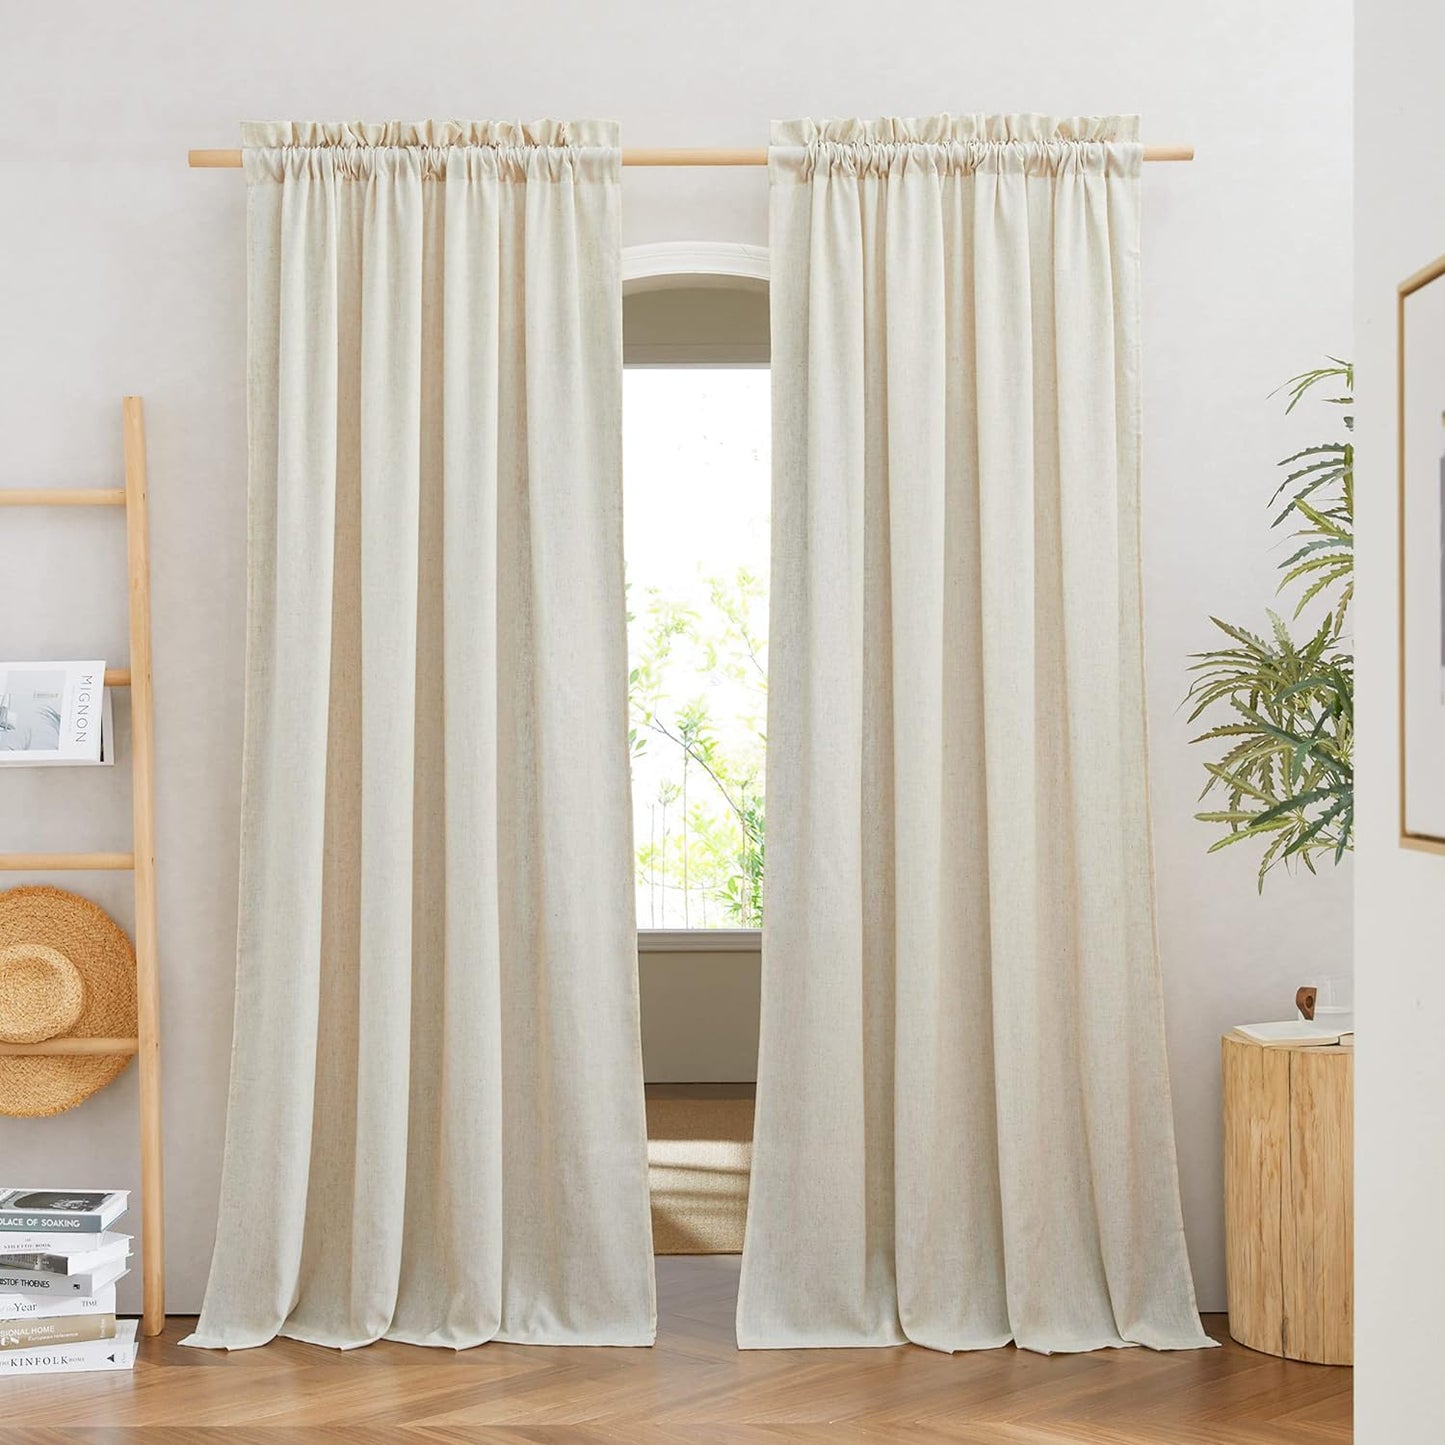 NICETOWN Natural Linen Curtains & Drapes for Windows 84 Inch Long, Rod Pocket Thick Flax Semi Sheer Privacy Assured with Light Filtering for Bedroom/Living Room, W55 X L84, 2 Pieces  NICETOWN Natural W55 X L90 